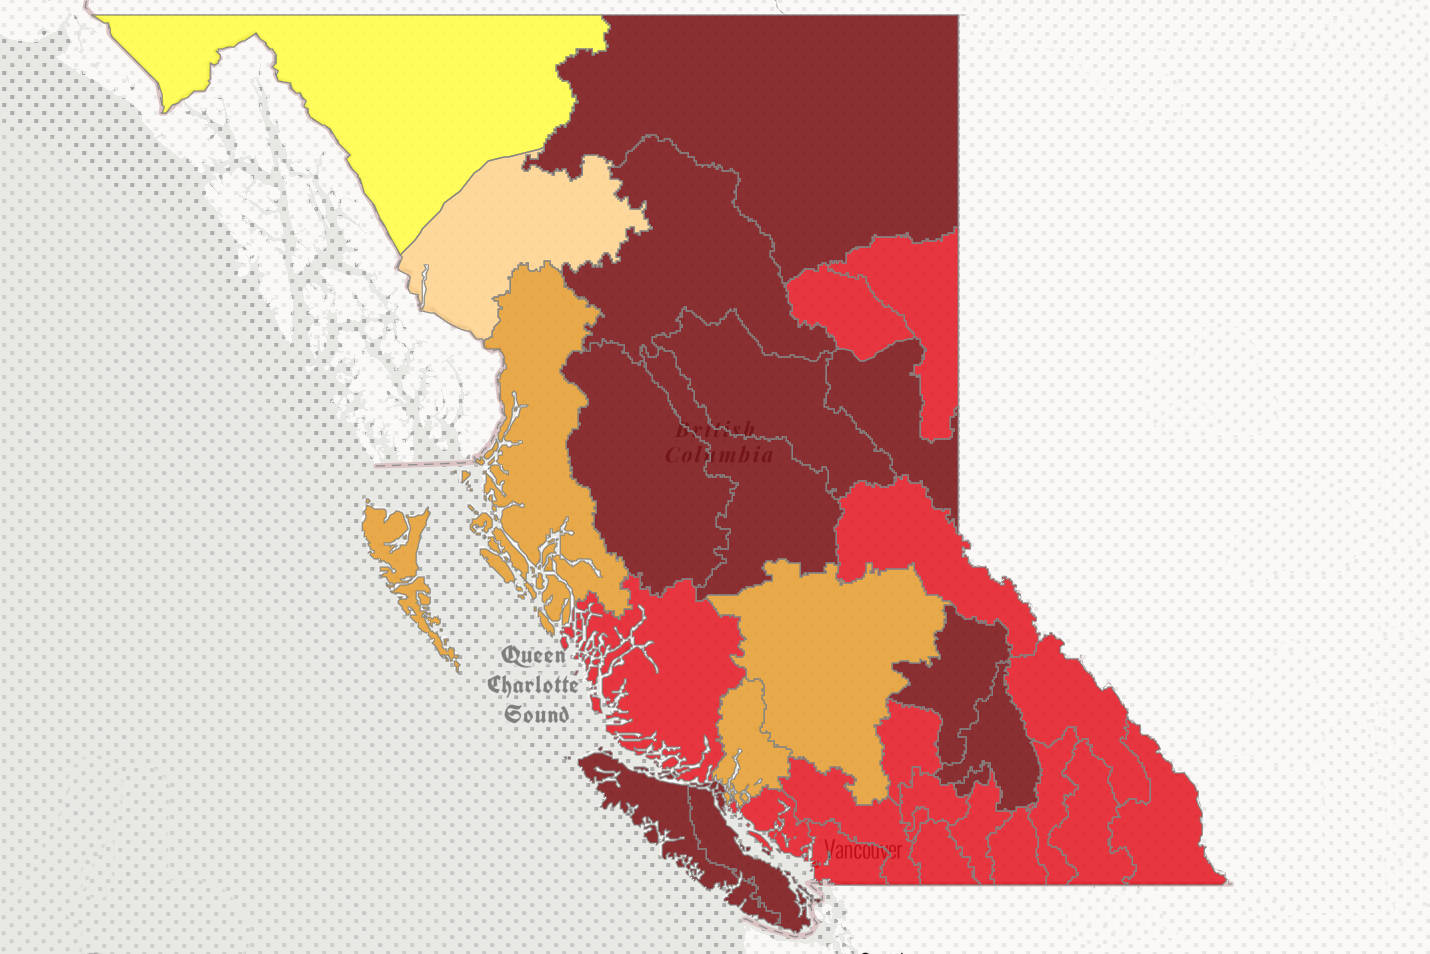 The red areas on the map from Aug. 3 show Drought Level 4 conditions, while the dark red areas show Drought Level 5. (Government of BC)